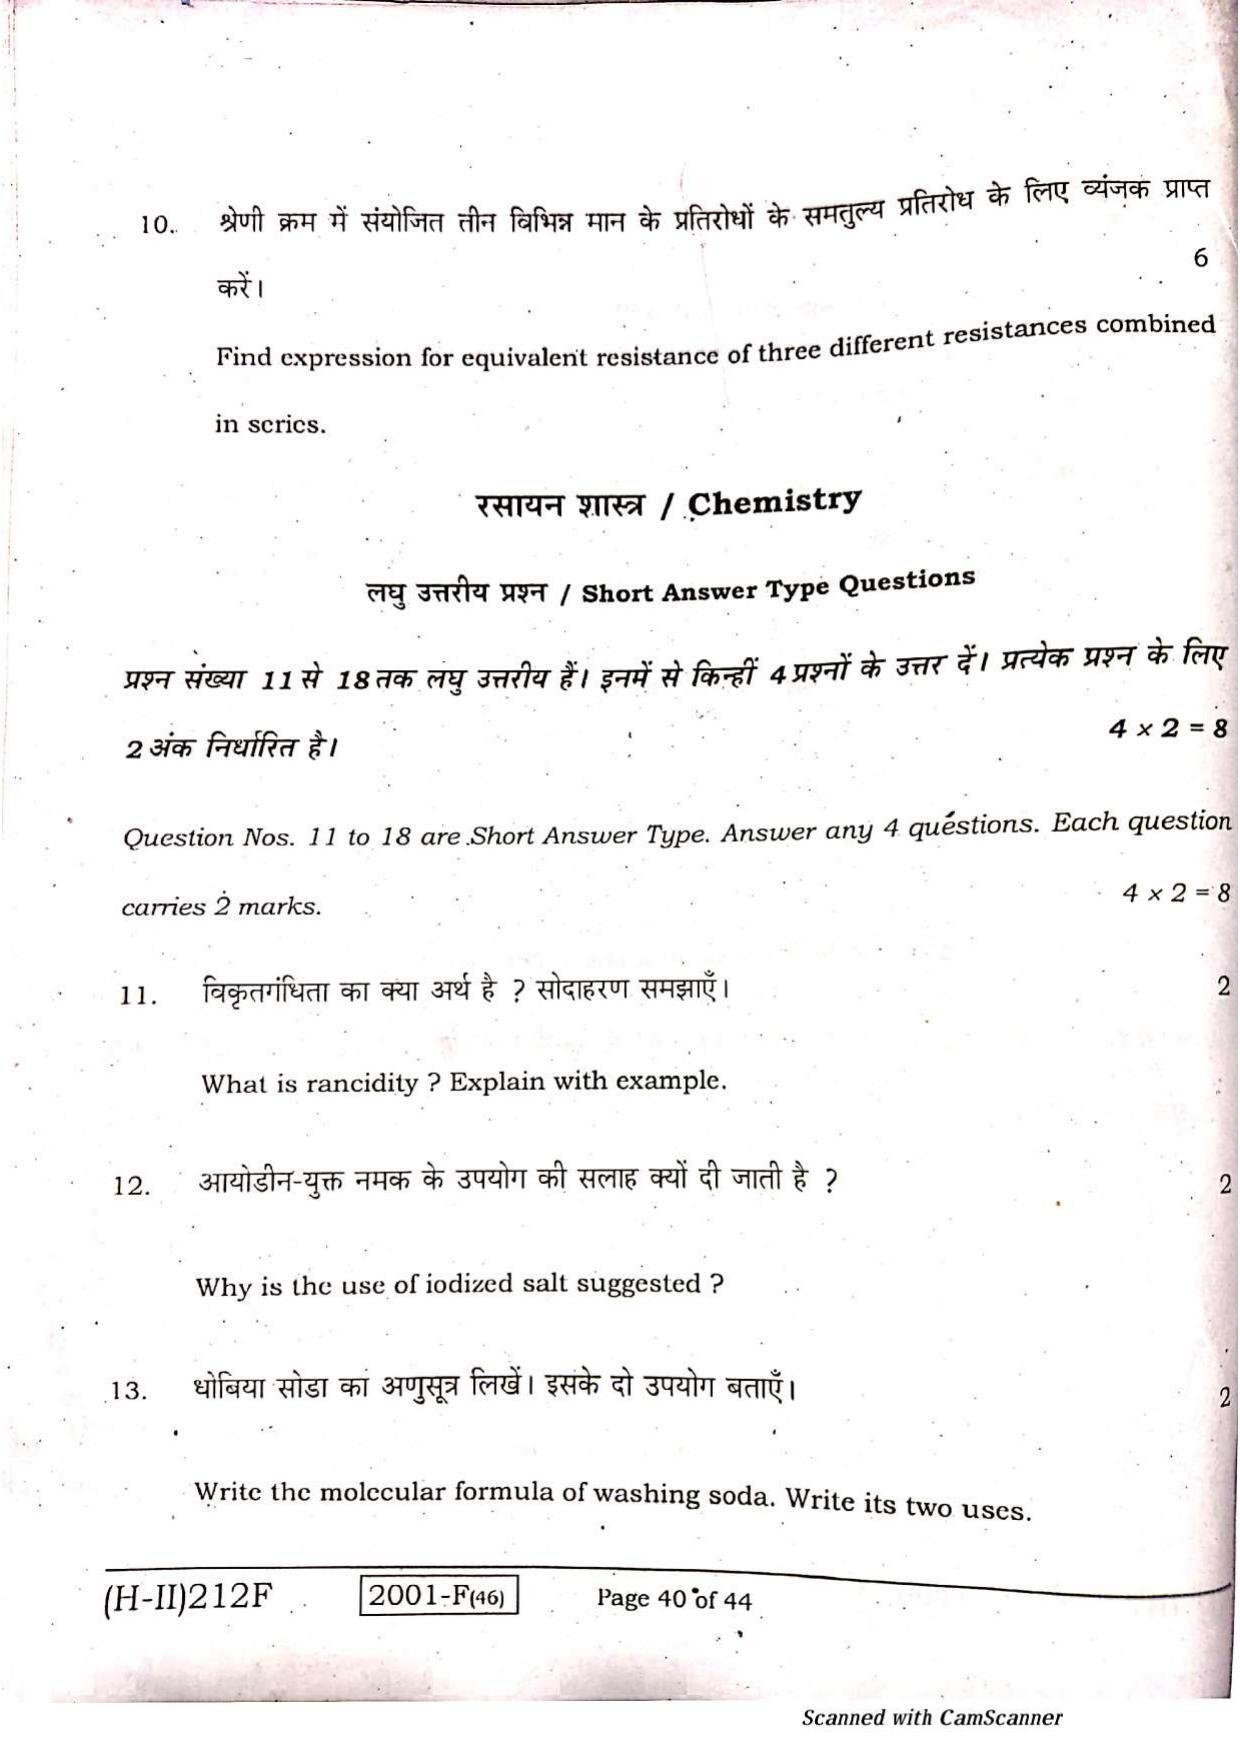 Bihar Board Class 10 Science 2021 (2nd Sitting) Question Paper - Page 38